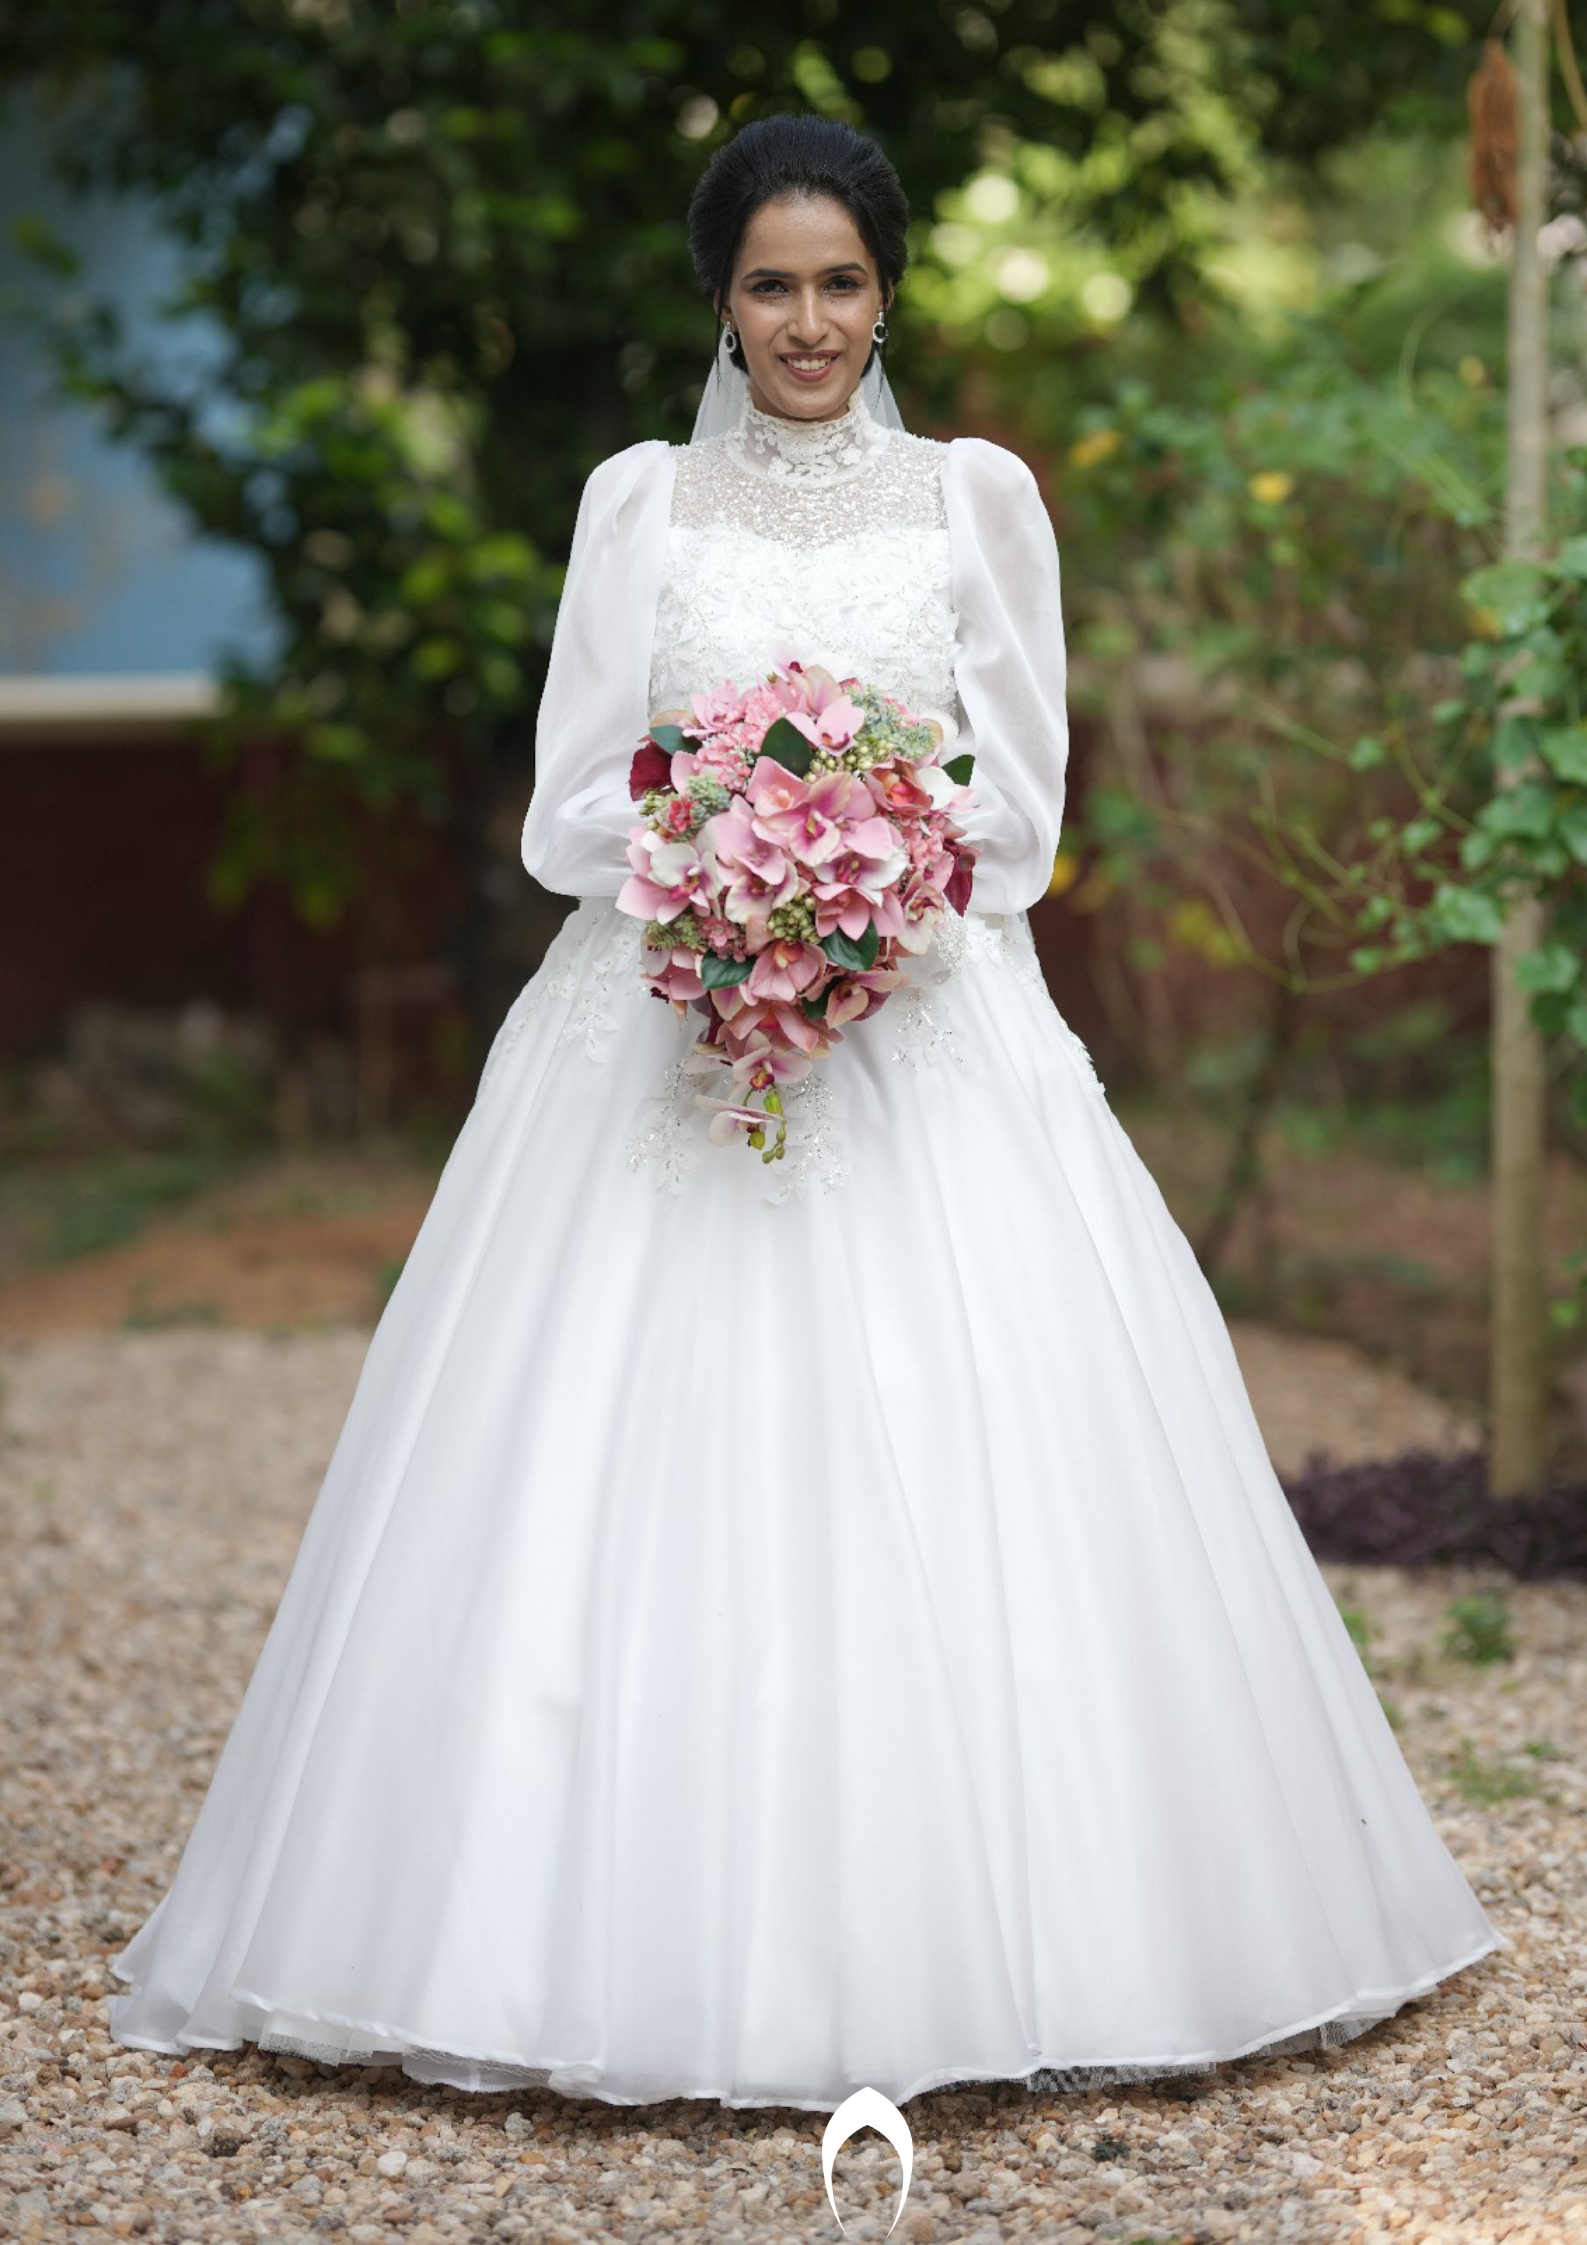 Christian Bridal Gown for sale - Women - 1758955777